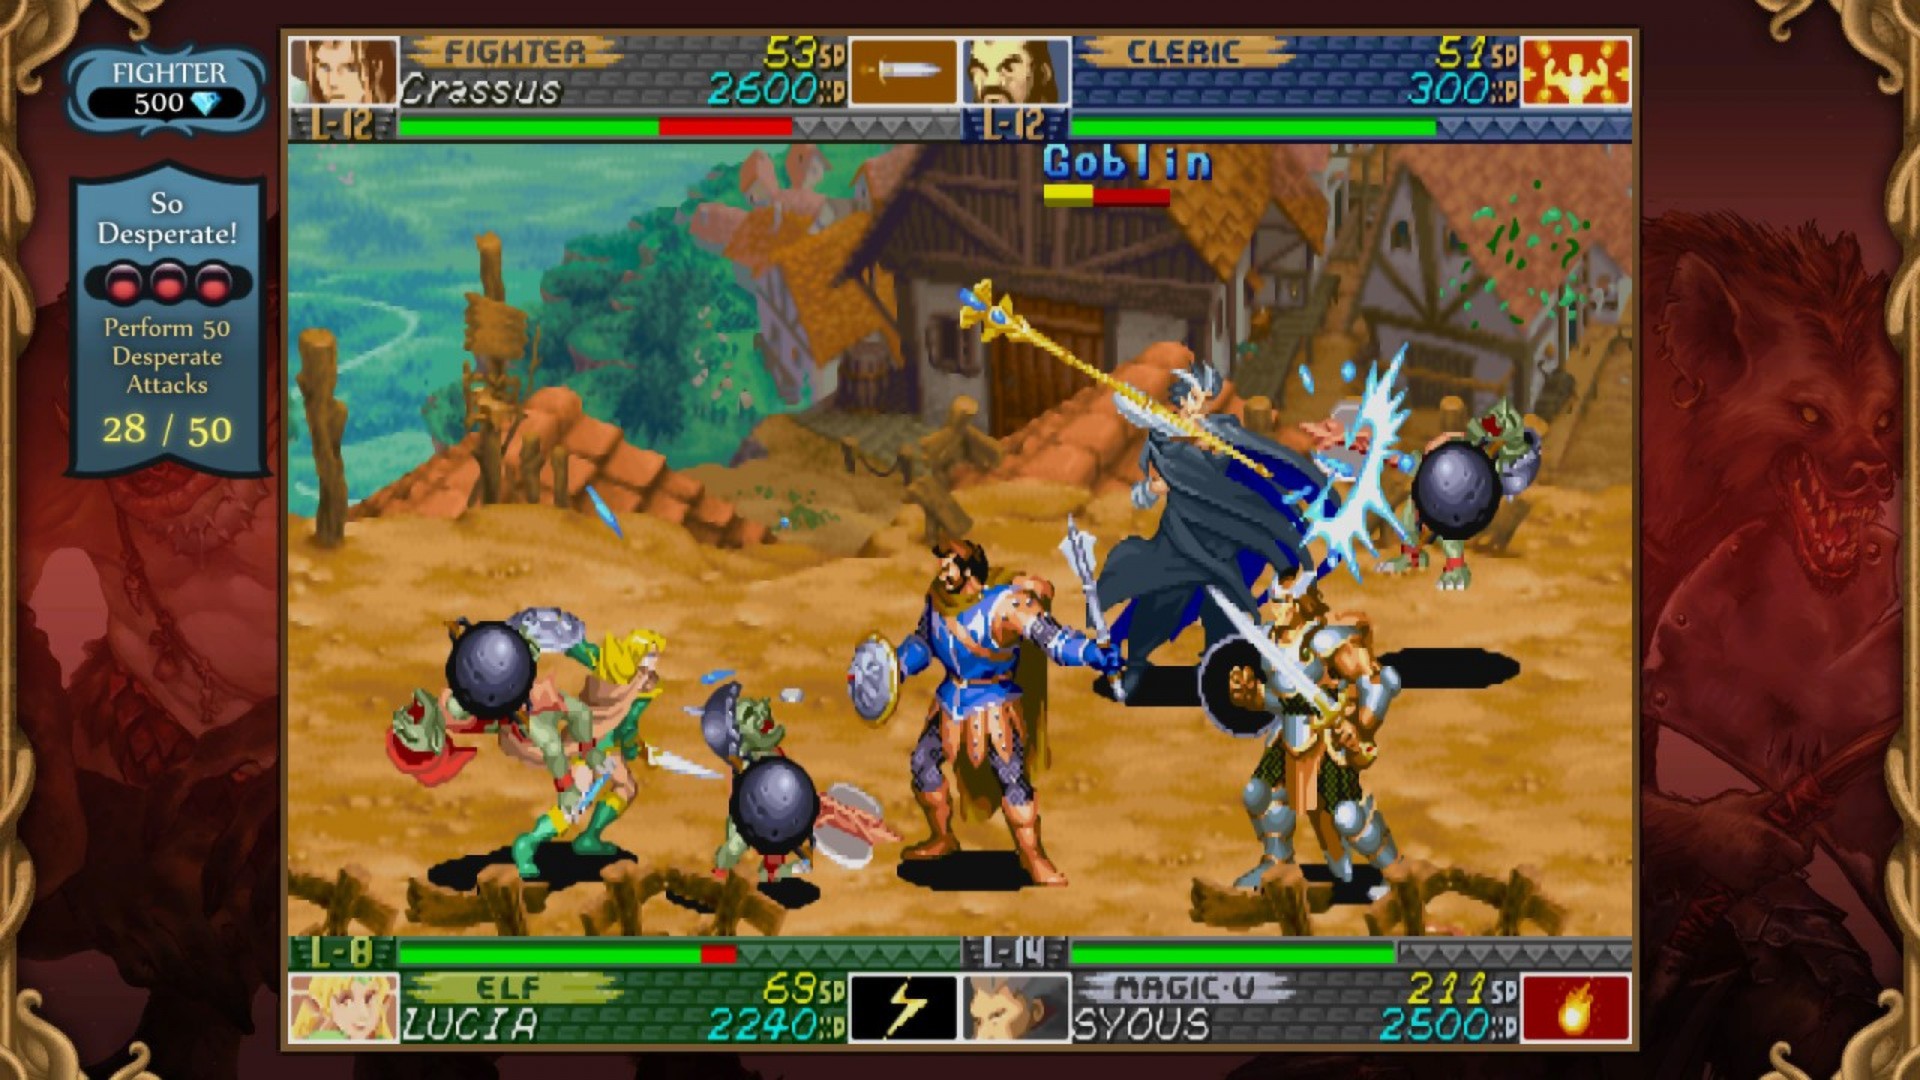 Save 67% on Dungeons & Dragons: Chronicles of Mystara on Steam